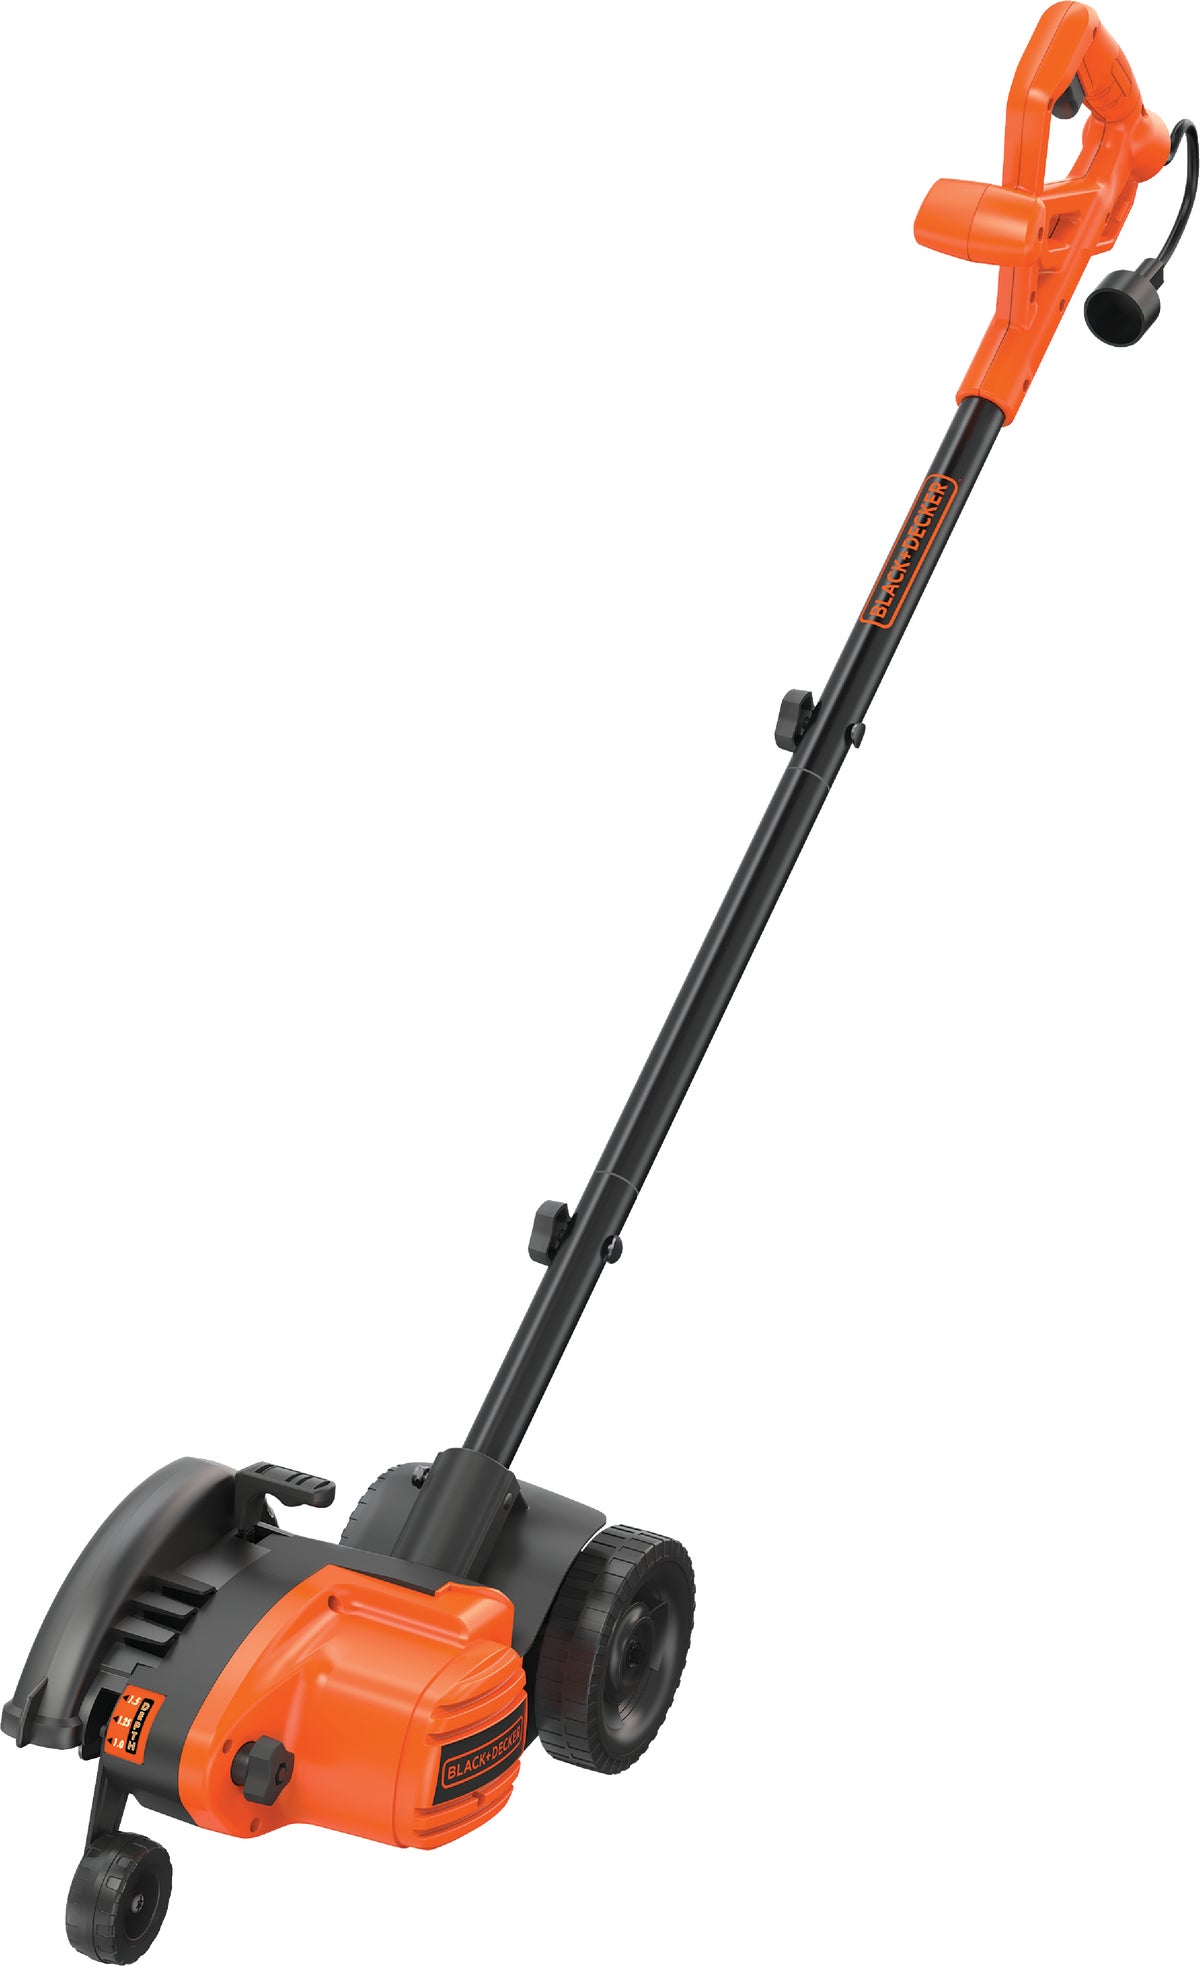 Black & Decker Electric Lawn Mower, String Trimmer, Edger, 3-in-1, Corded